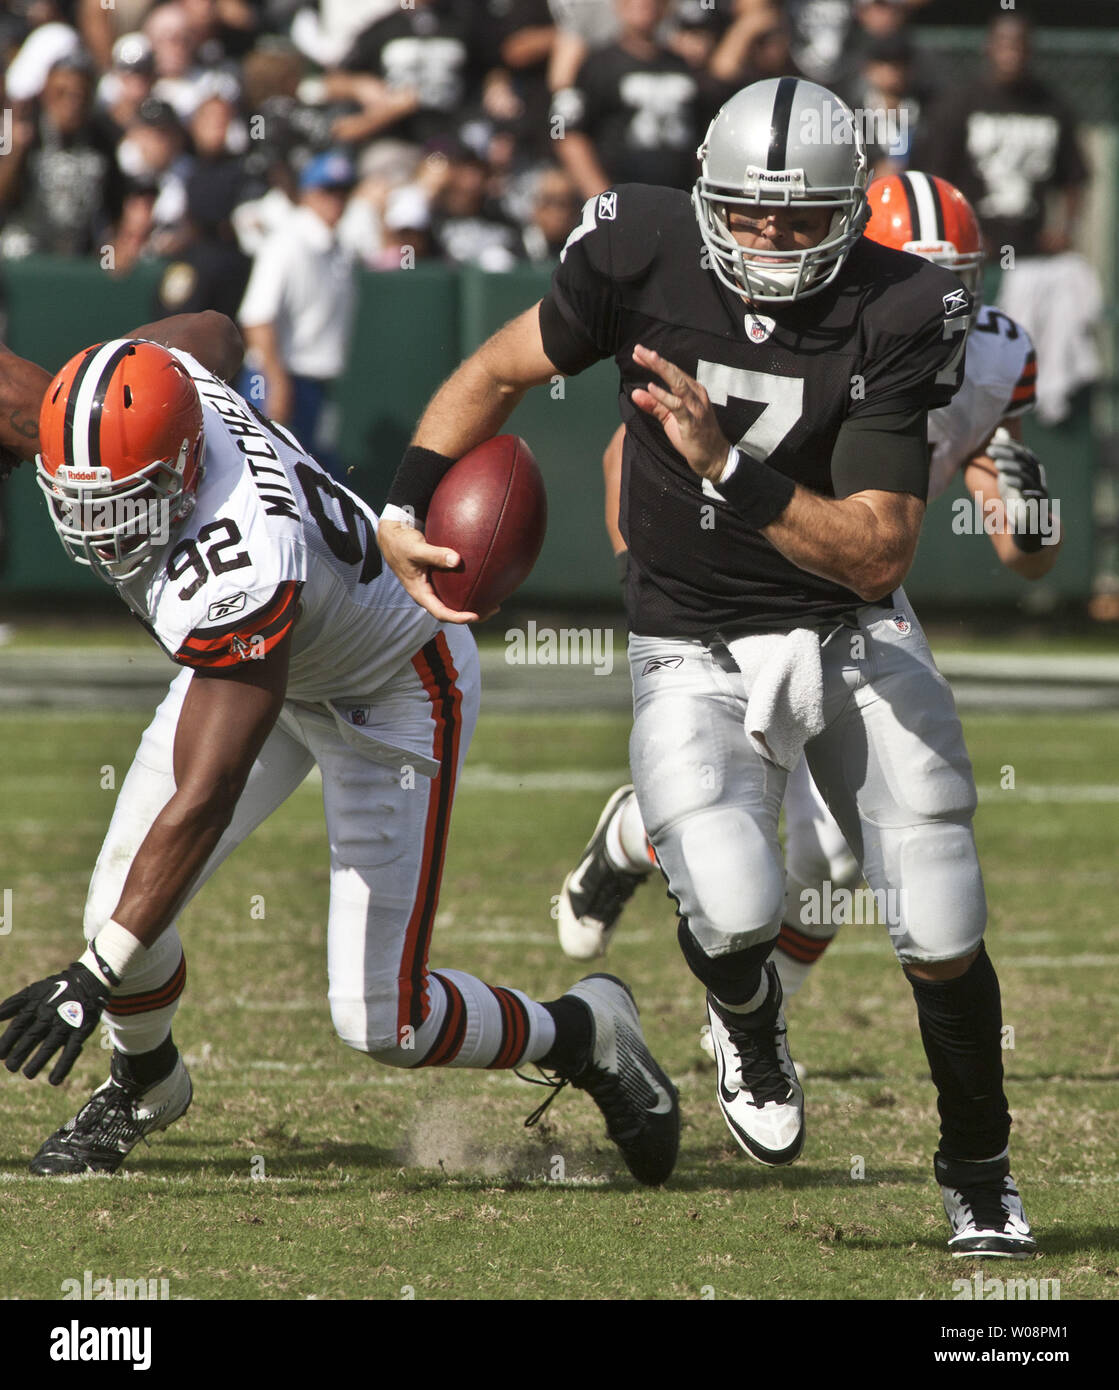 Oakland Raiders QB Kyle Boller, playing for the injured Jason Campbell runs against the Cleveland Browns at the Coliseum in Oakland, California on October 16, 2011. The Raiders defeated the Browns 24-17.     UPI/Terry Schmitt Stock Photo